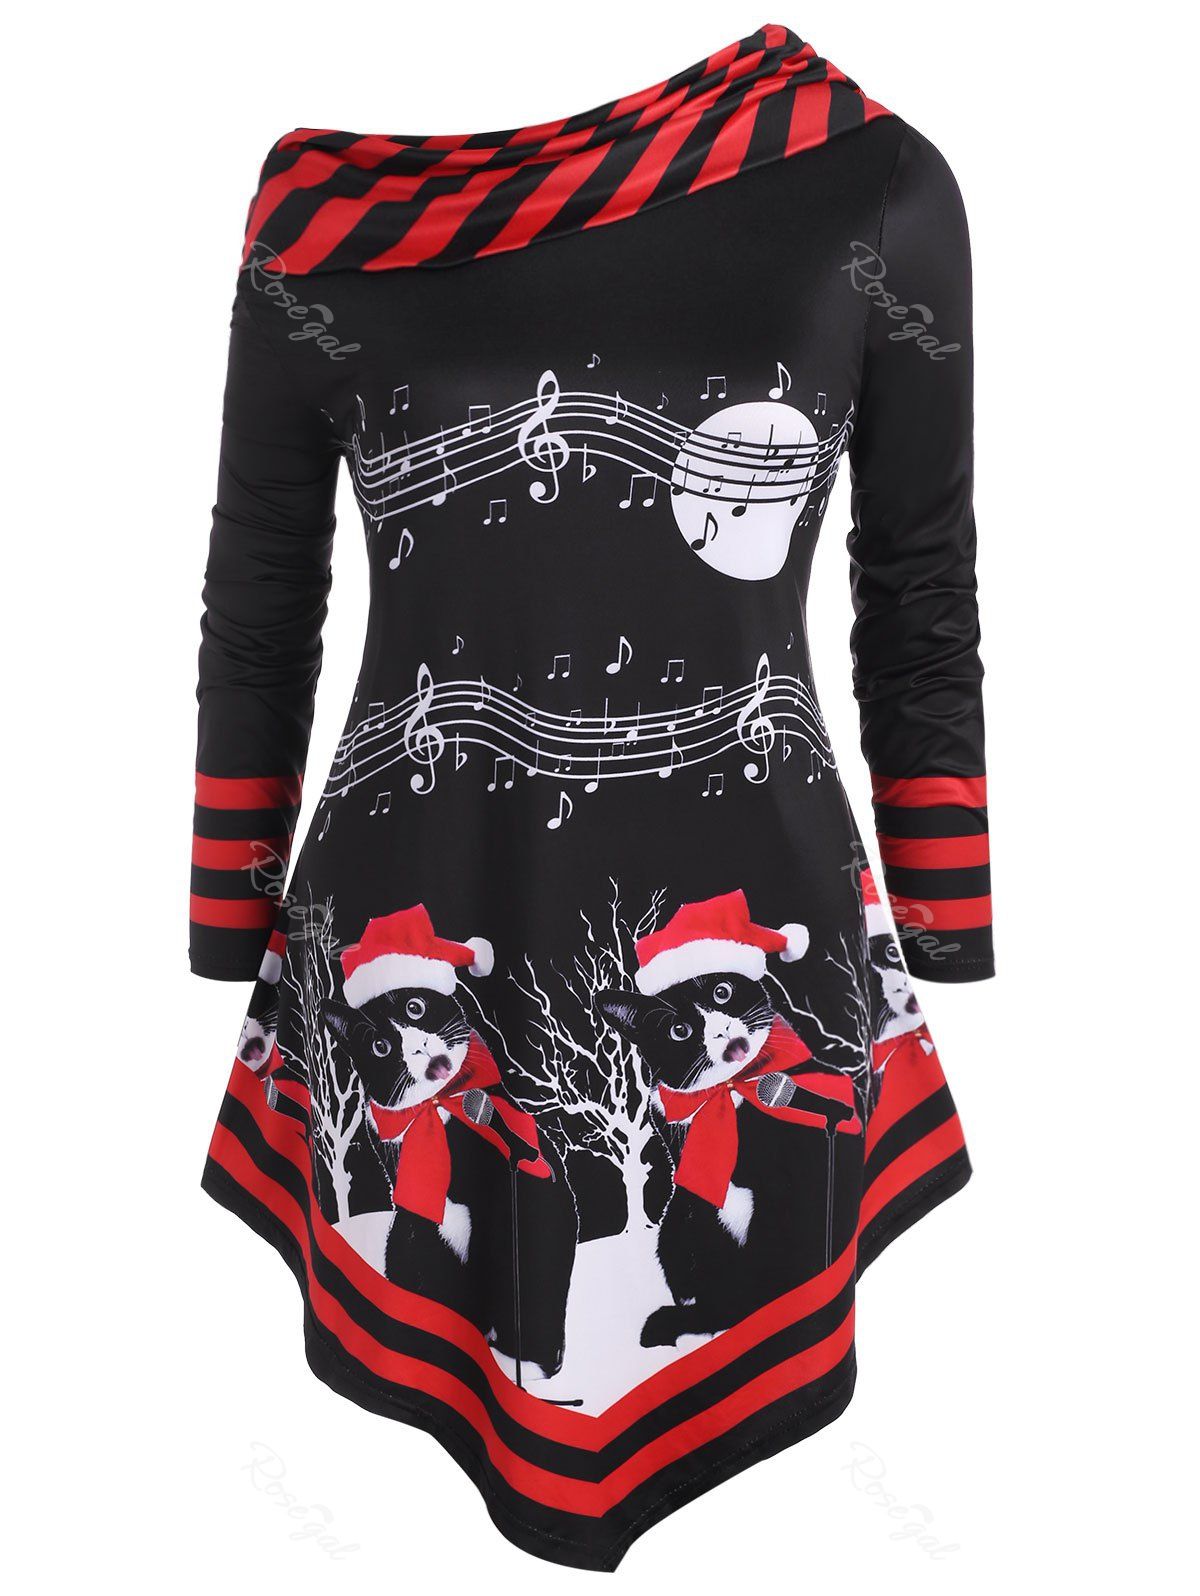 Musical Note Print Christmas Cat Stripes Panel Plus Size Top